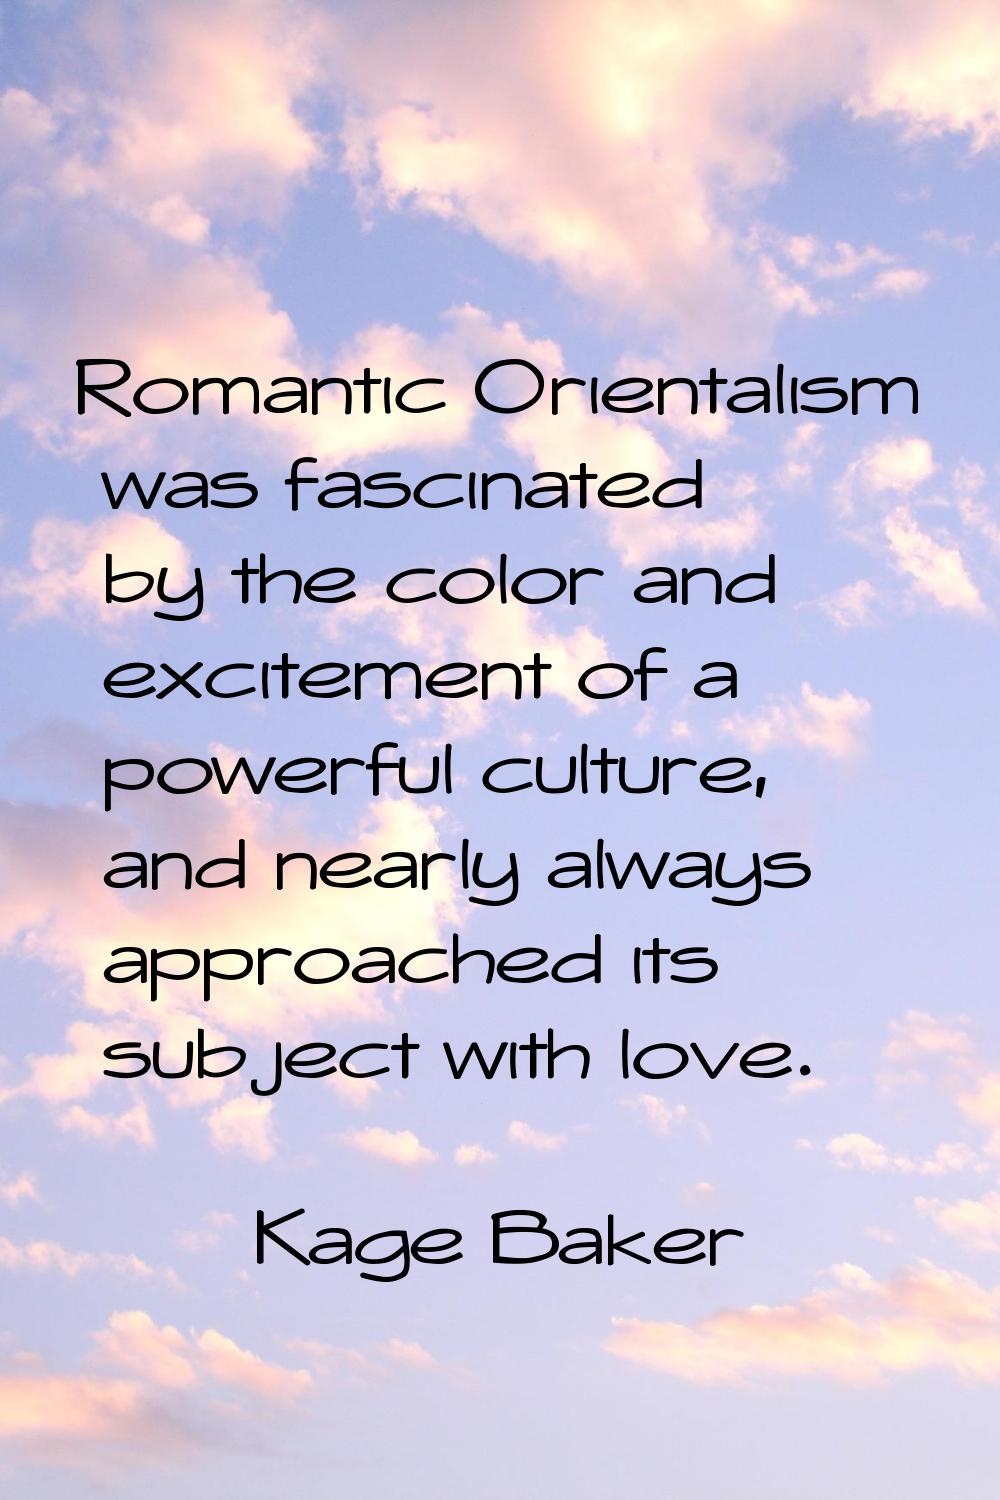 Romantic Orientalism was fascinated by the color and excitement of a powerful culture, and nearly a